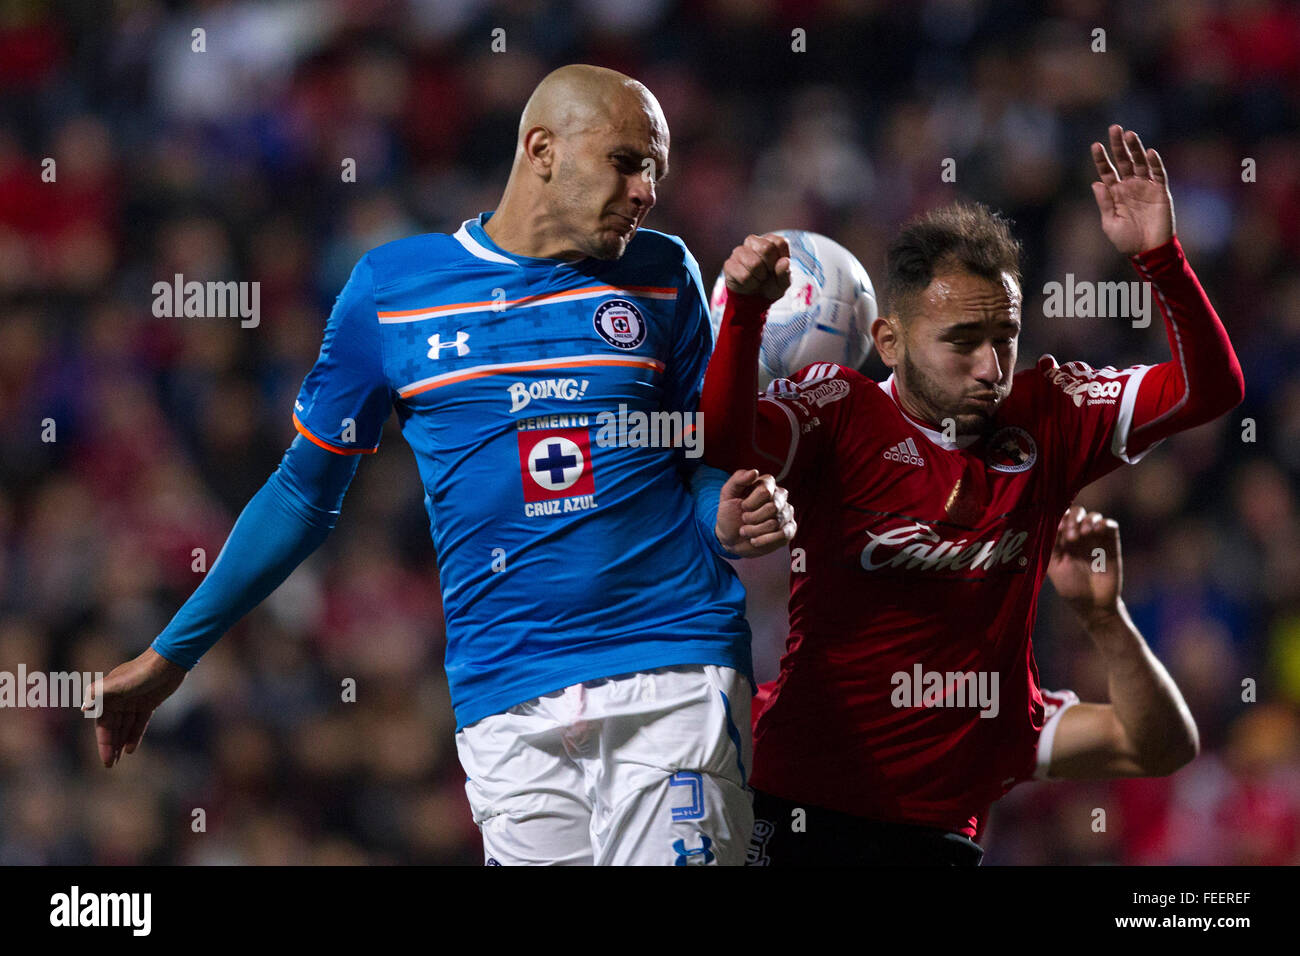 Tijuana, Mexico. 5th Feb, 2016. Carlos Guzman (R) of Xolos vies with Fabio Santos of Cruz Azul during their corresponding match to the Day 5 of the Closing Tournament 2016 of MX League in Tijuana, Mexico, on Feb. 5, 2016. The match ended in a 1-1 draw. © Guillermo Arias/Xinhua/Alamy Live News Stock Photo